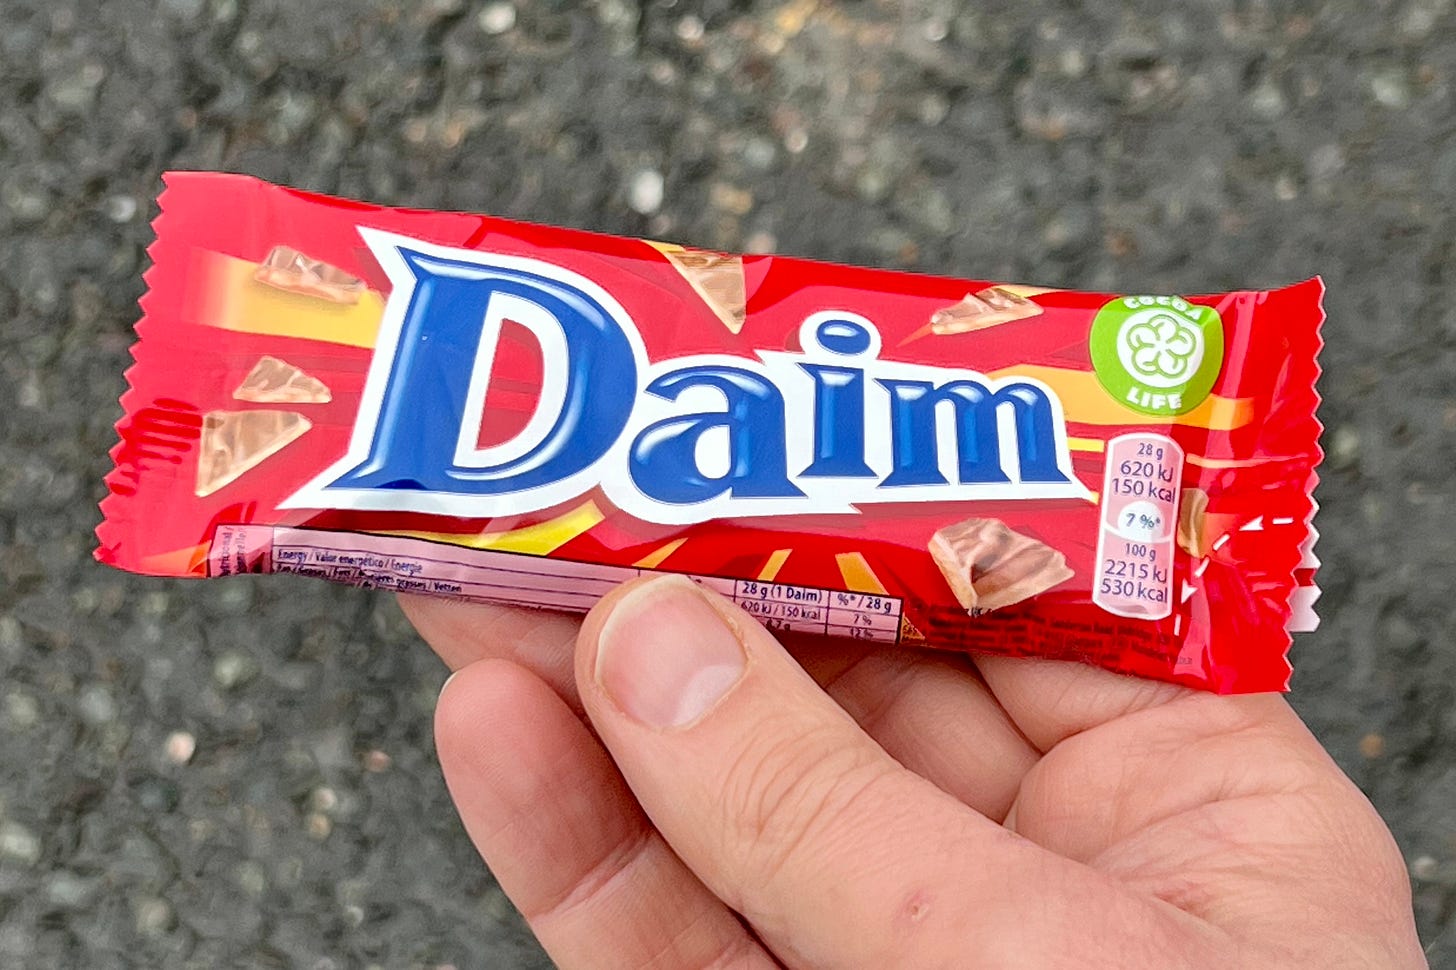 A daim bar that looks much bigger in the photo than it was in real life. It was certainly not worth 85p. Total rip off.